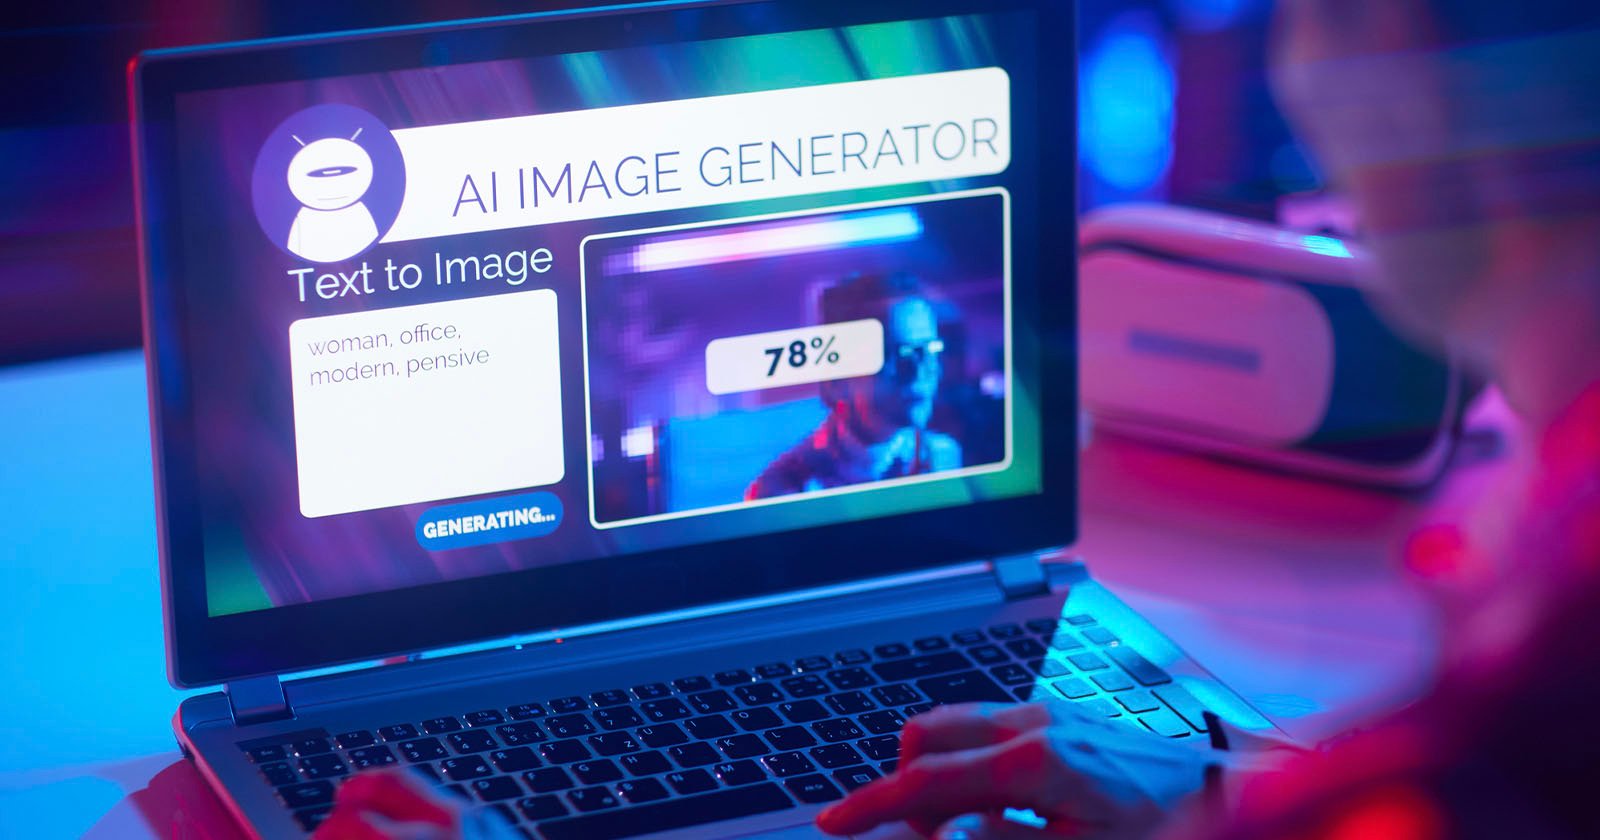 AI Image Generator Dropped by Computing Provider Over Nonconsensual Nude Pictures